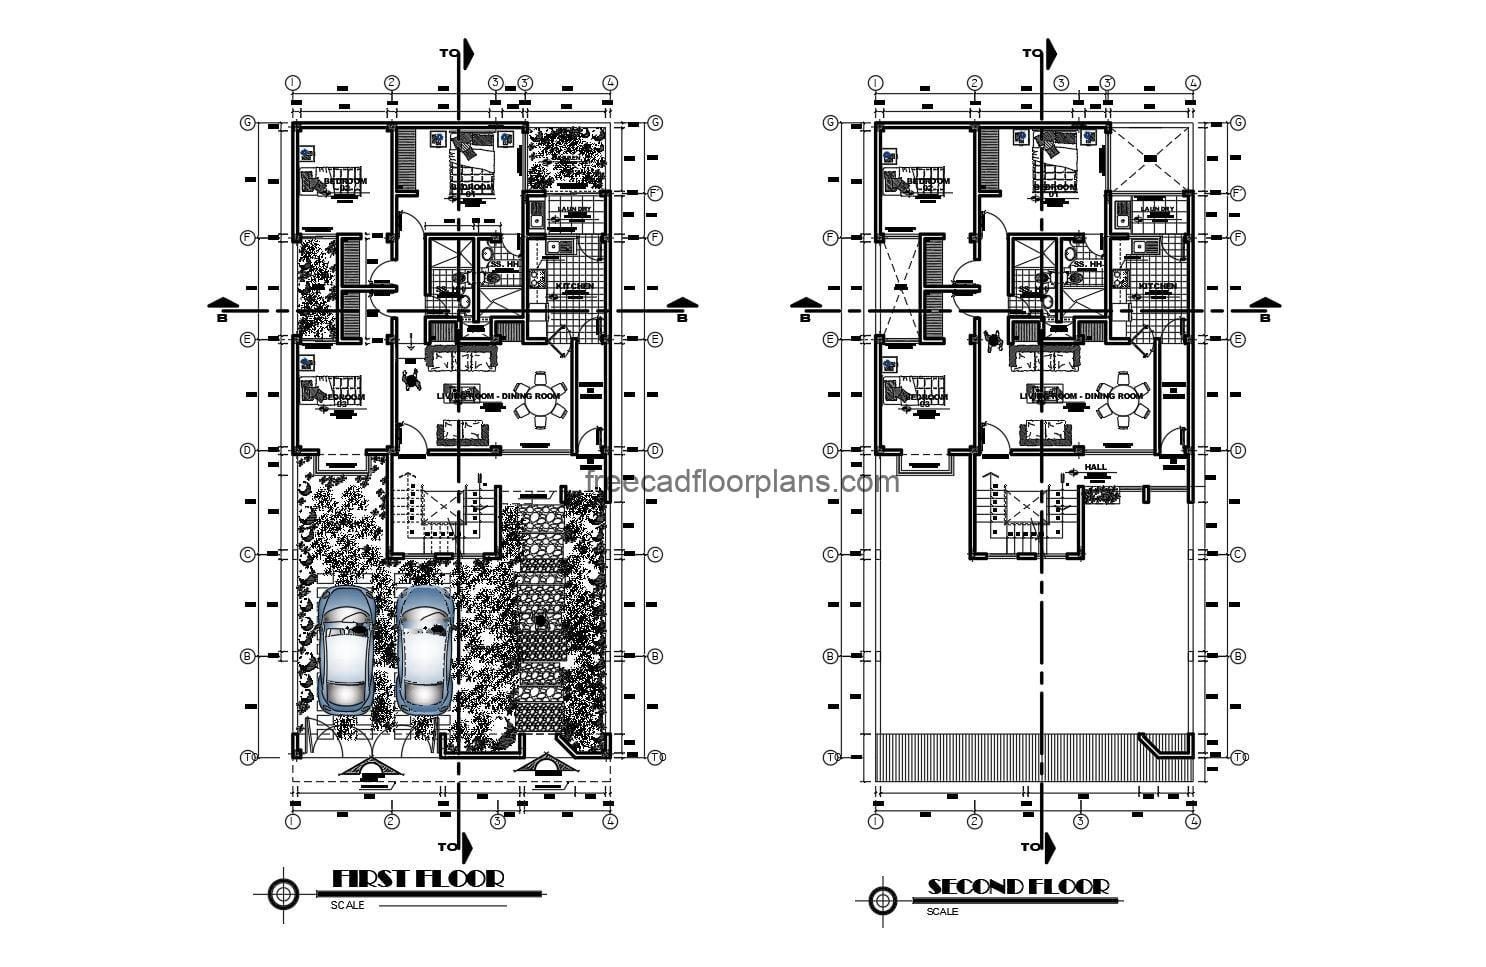 Furnished and sized architectural plans for free download in autocad format.